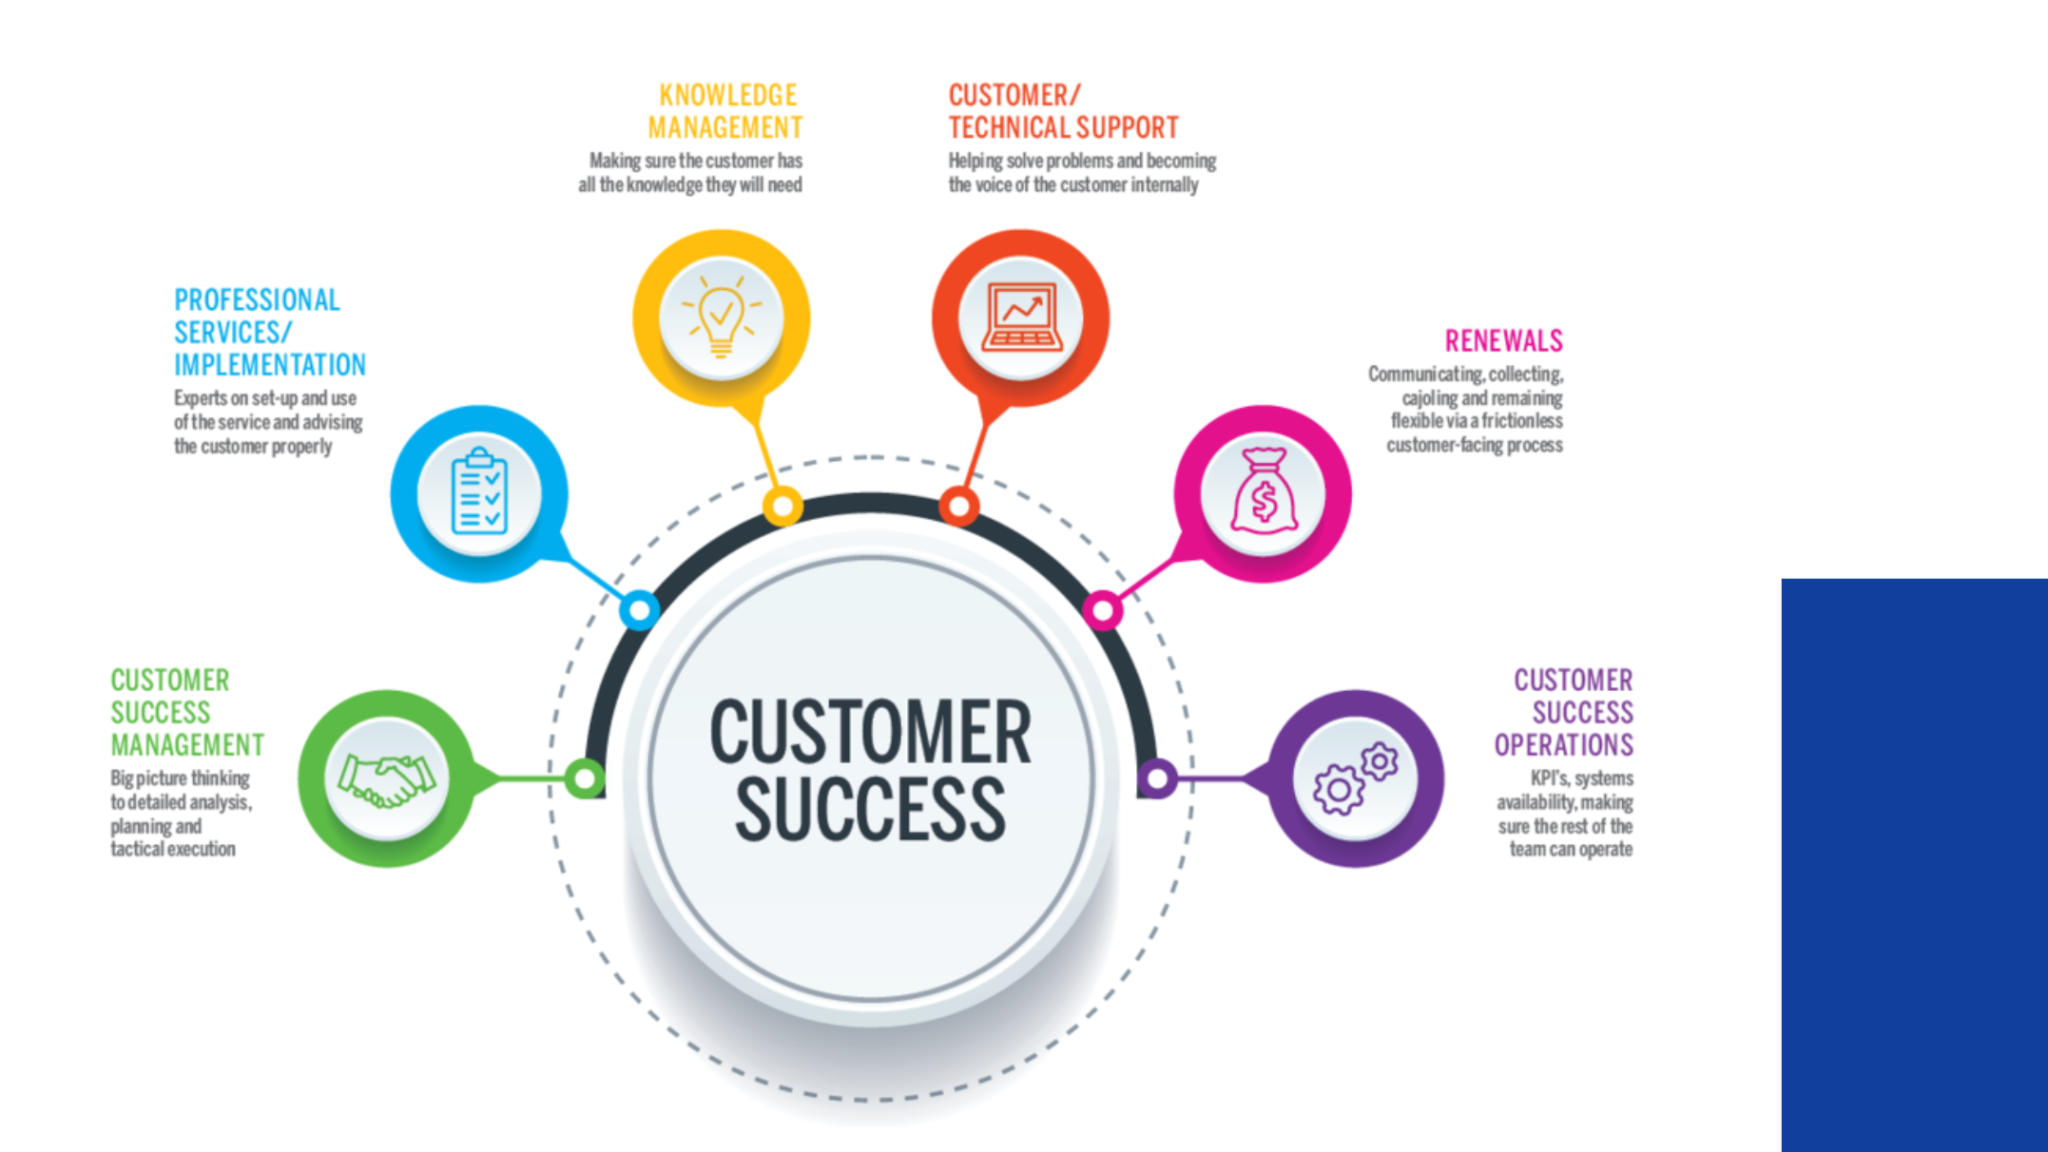 Customer Success Blueprint As Your Business Scales - CXChronicles